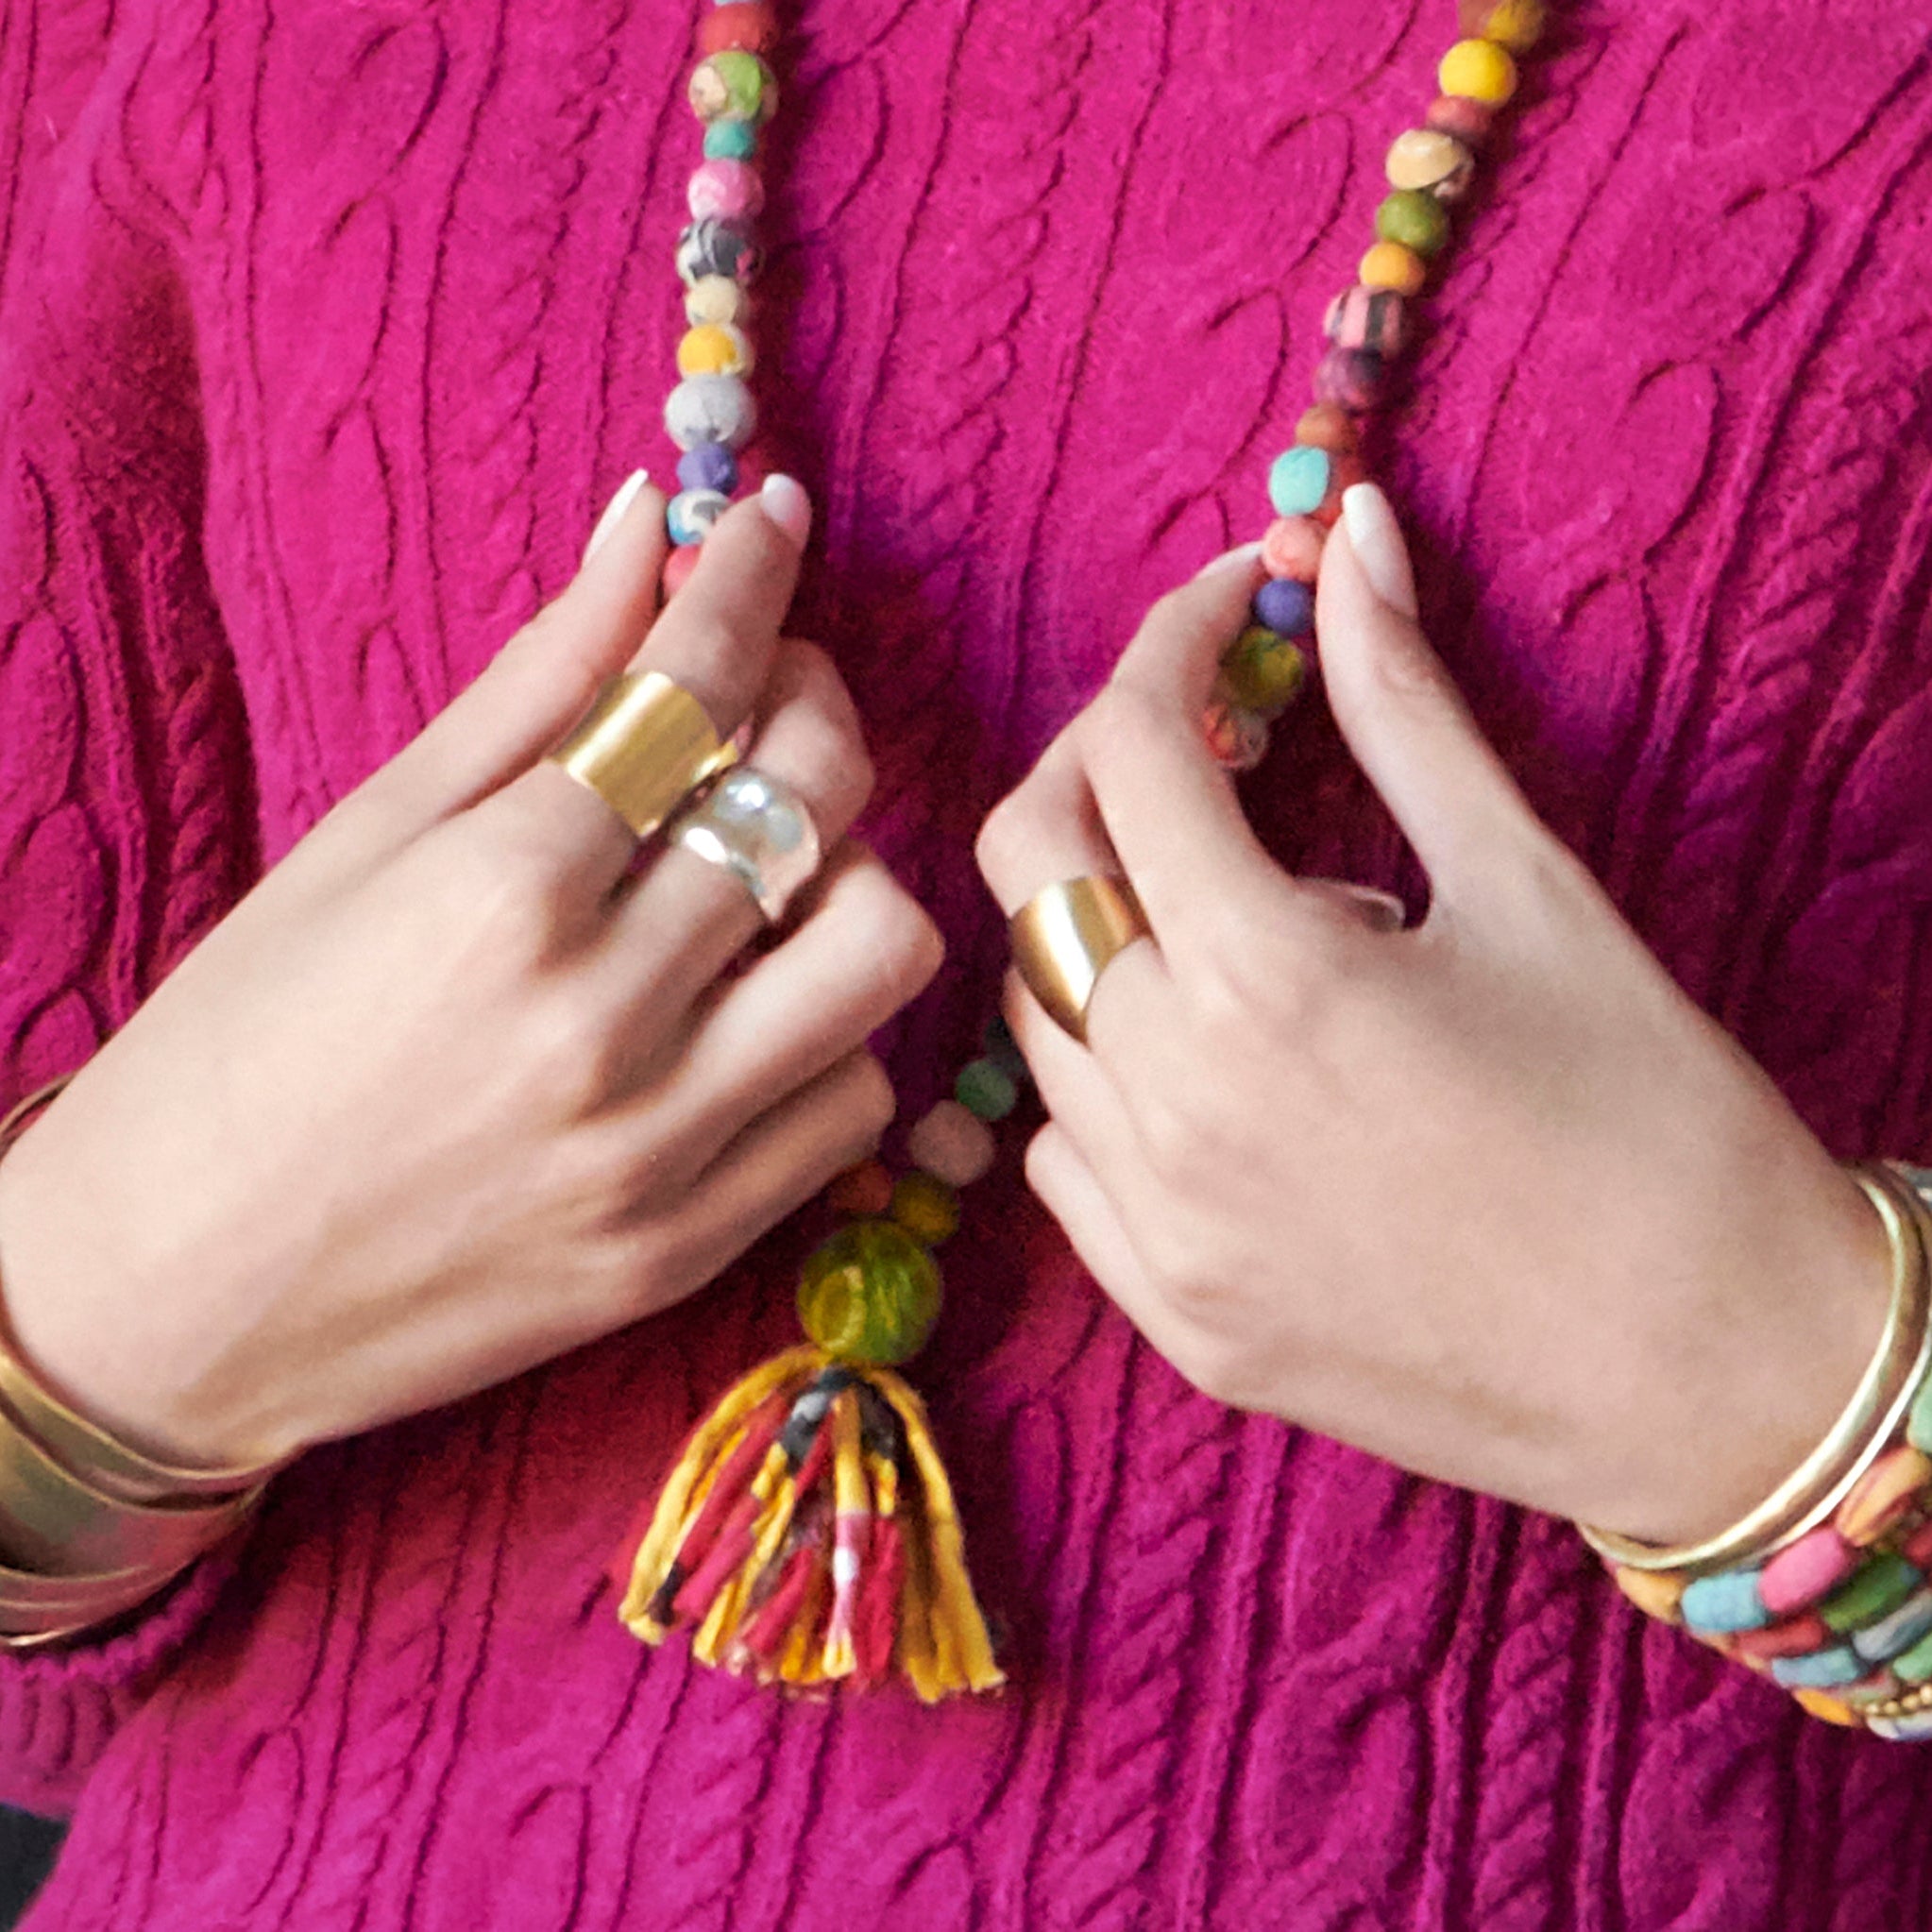 A woman's hands are shown adorned with various rings.